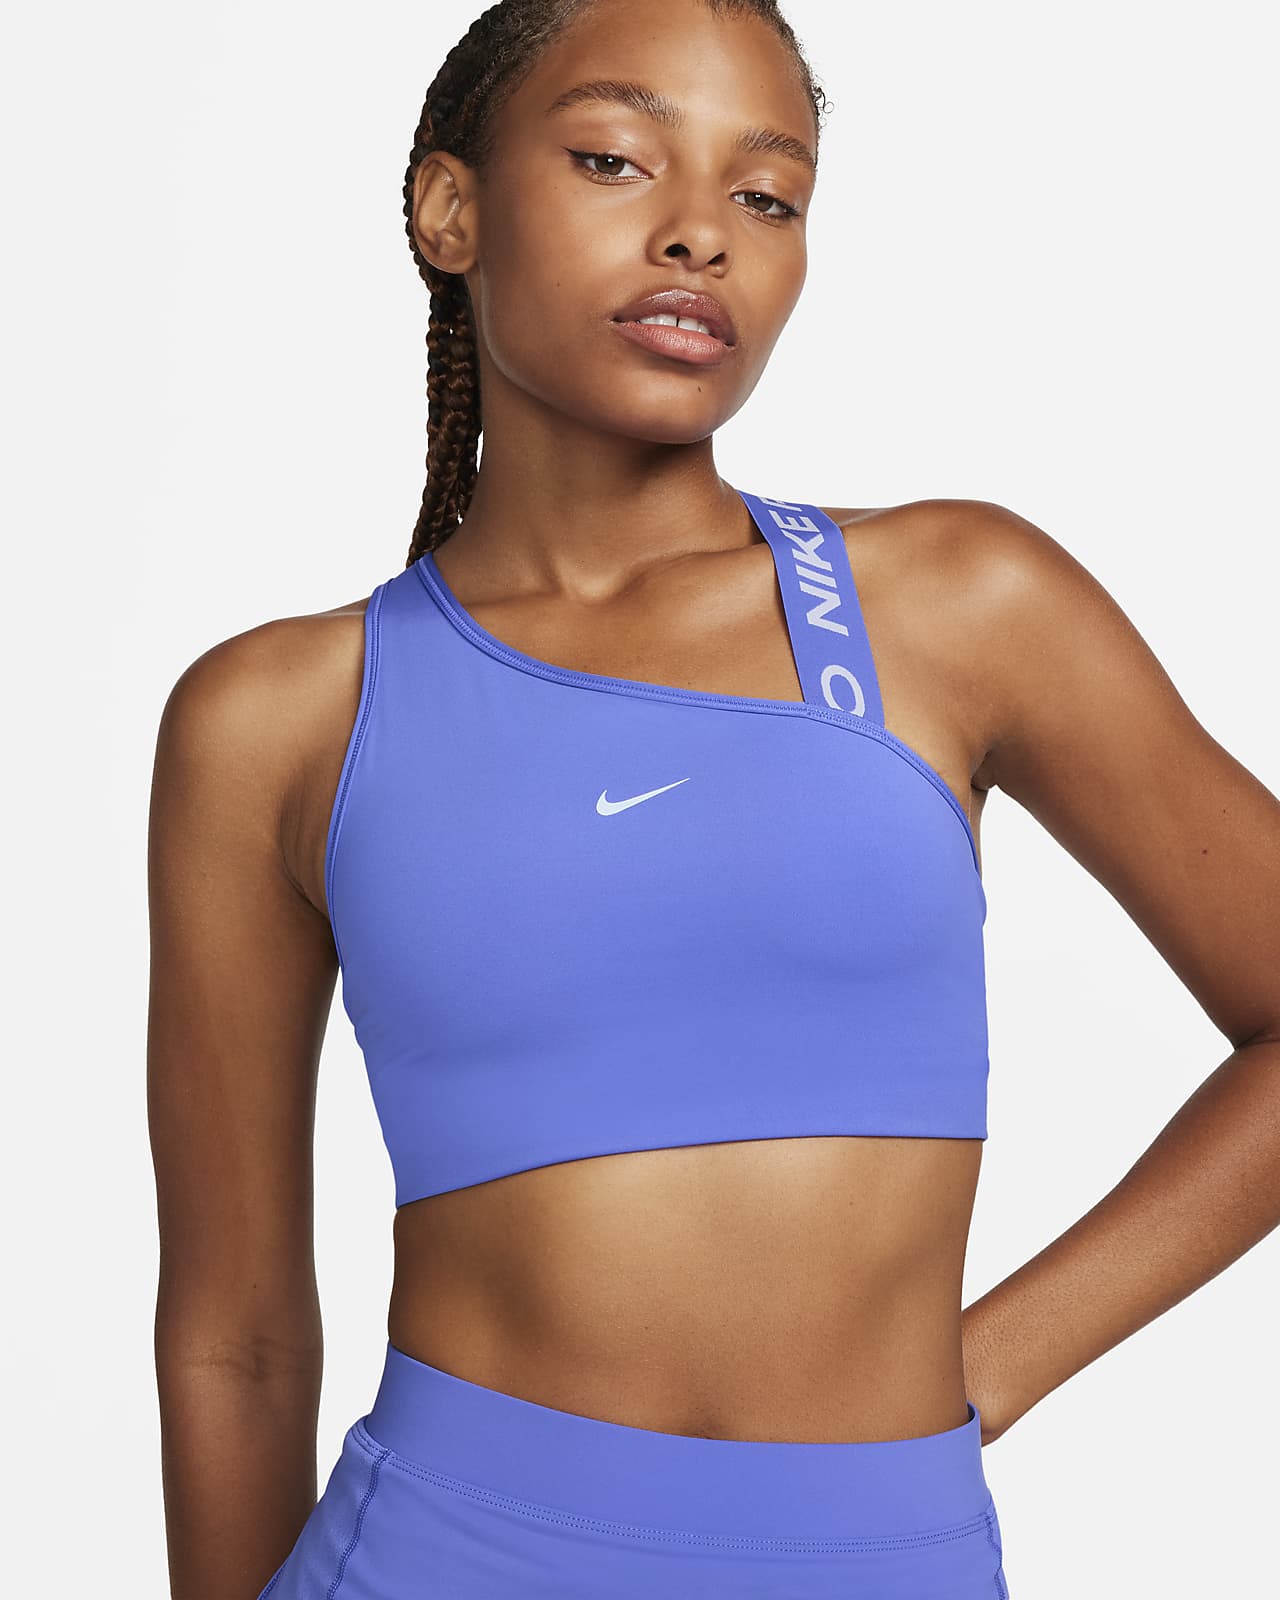 https://static.nike.com/a/images/t_PDP_1280_v1/f_auto,q_auto:eco/6eb64309-8541-4054-a22a-420faf07eee3/pro-swoosh-support-asymmetrical-sports-bra-T32dbx.png